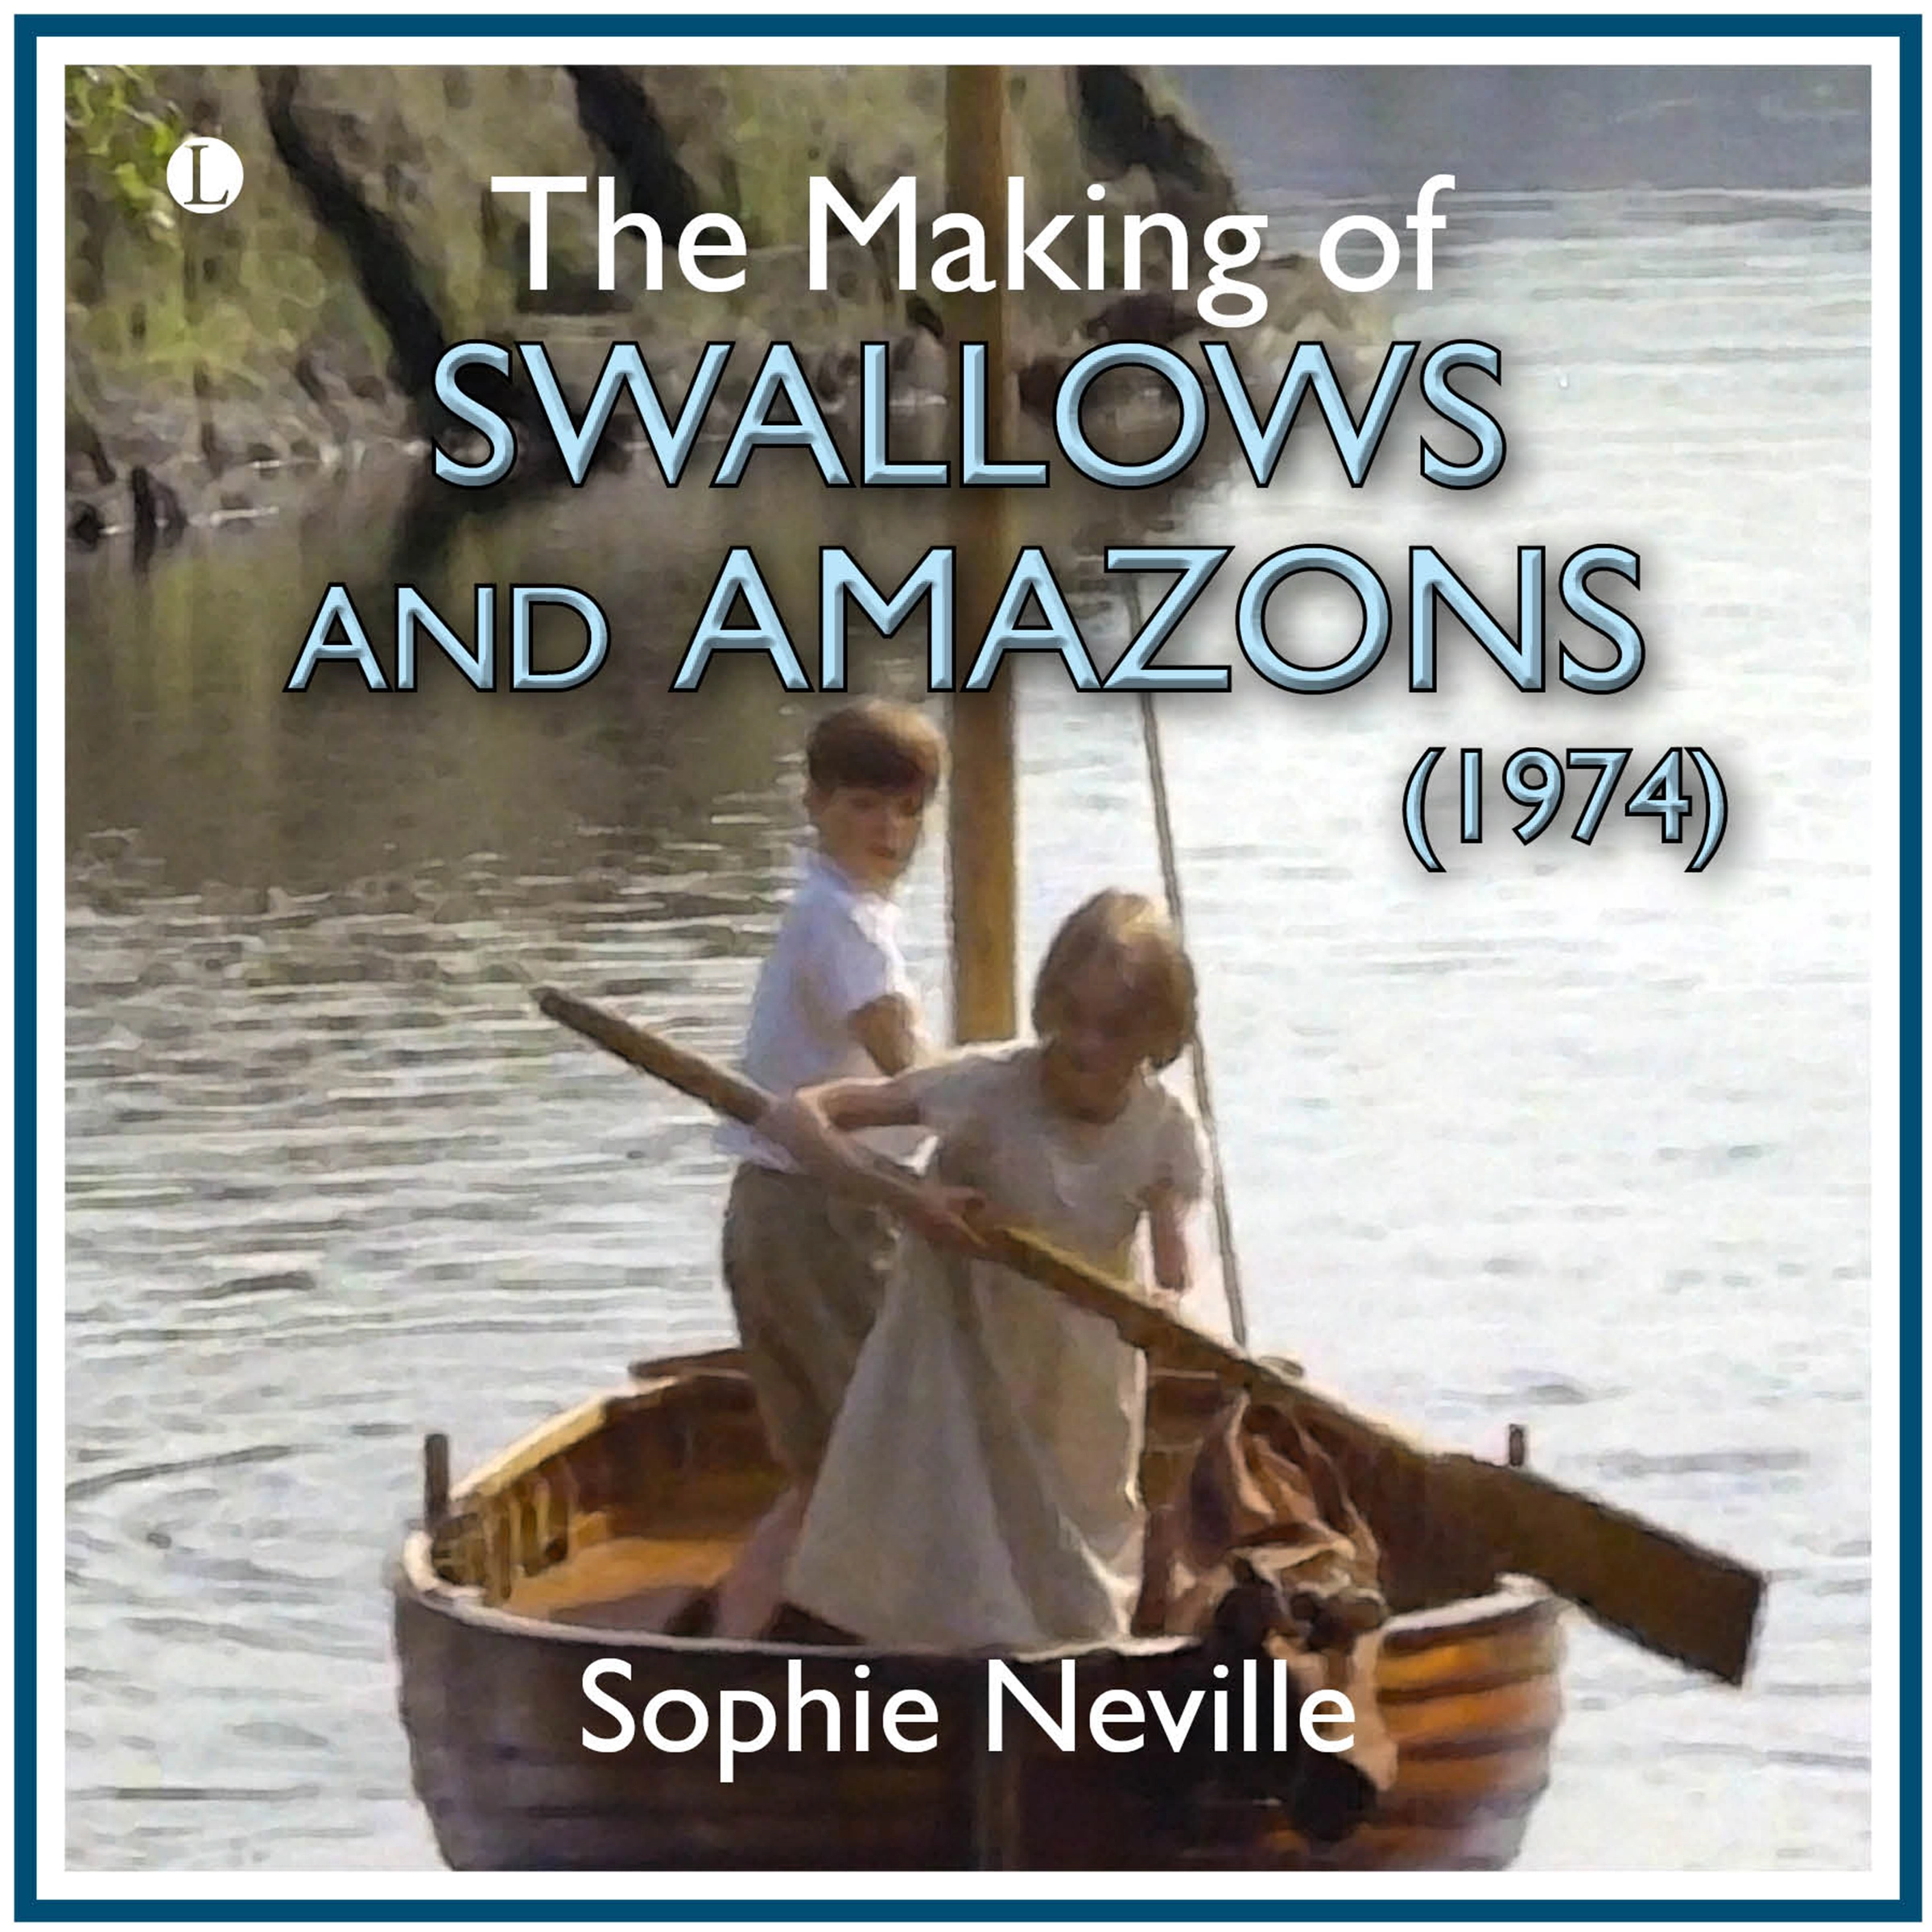 The Making of Swallows and Amazons (1974) Audiobook by Sophie Neville